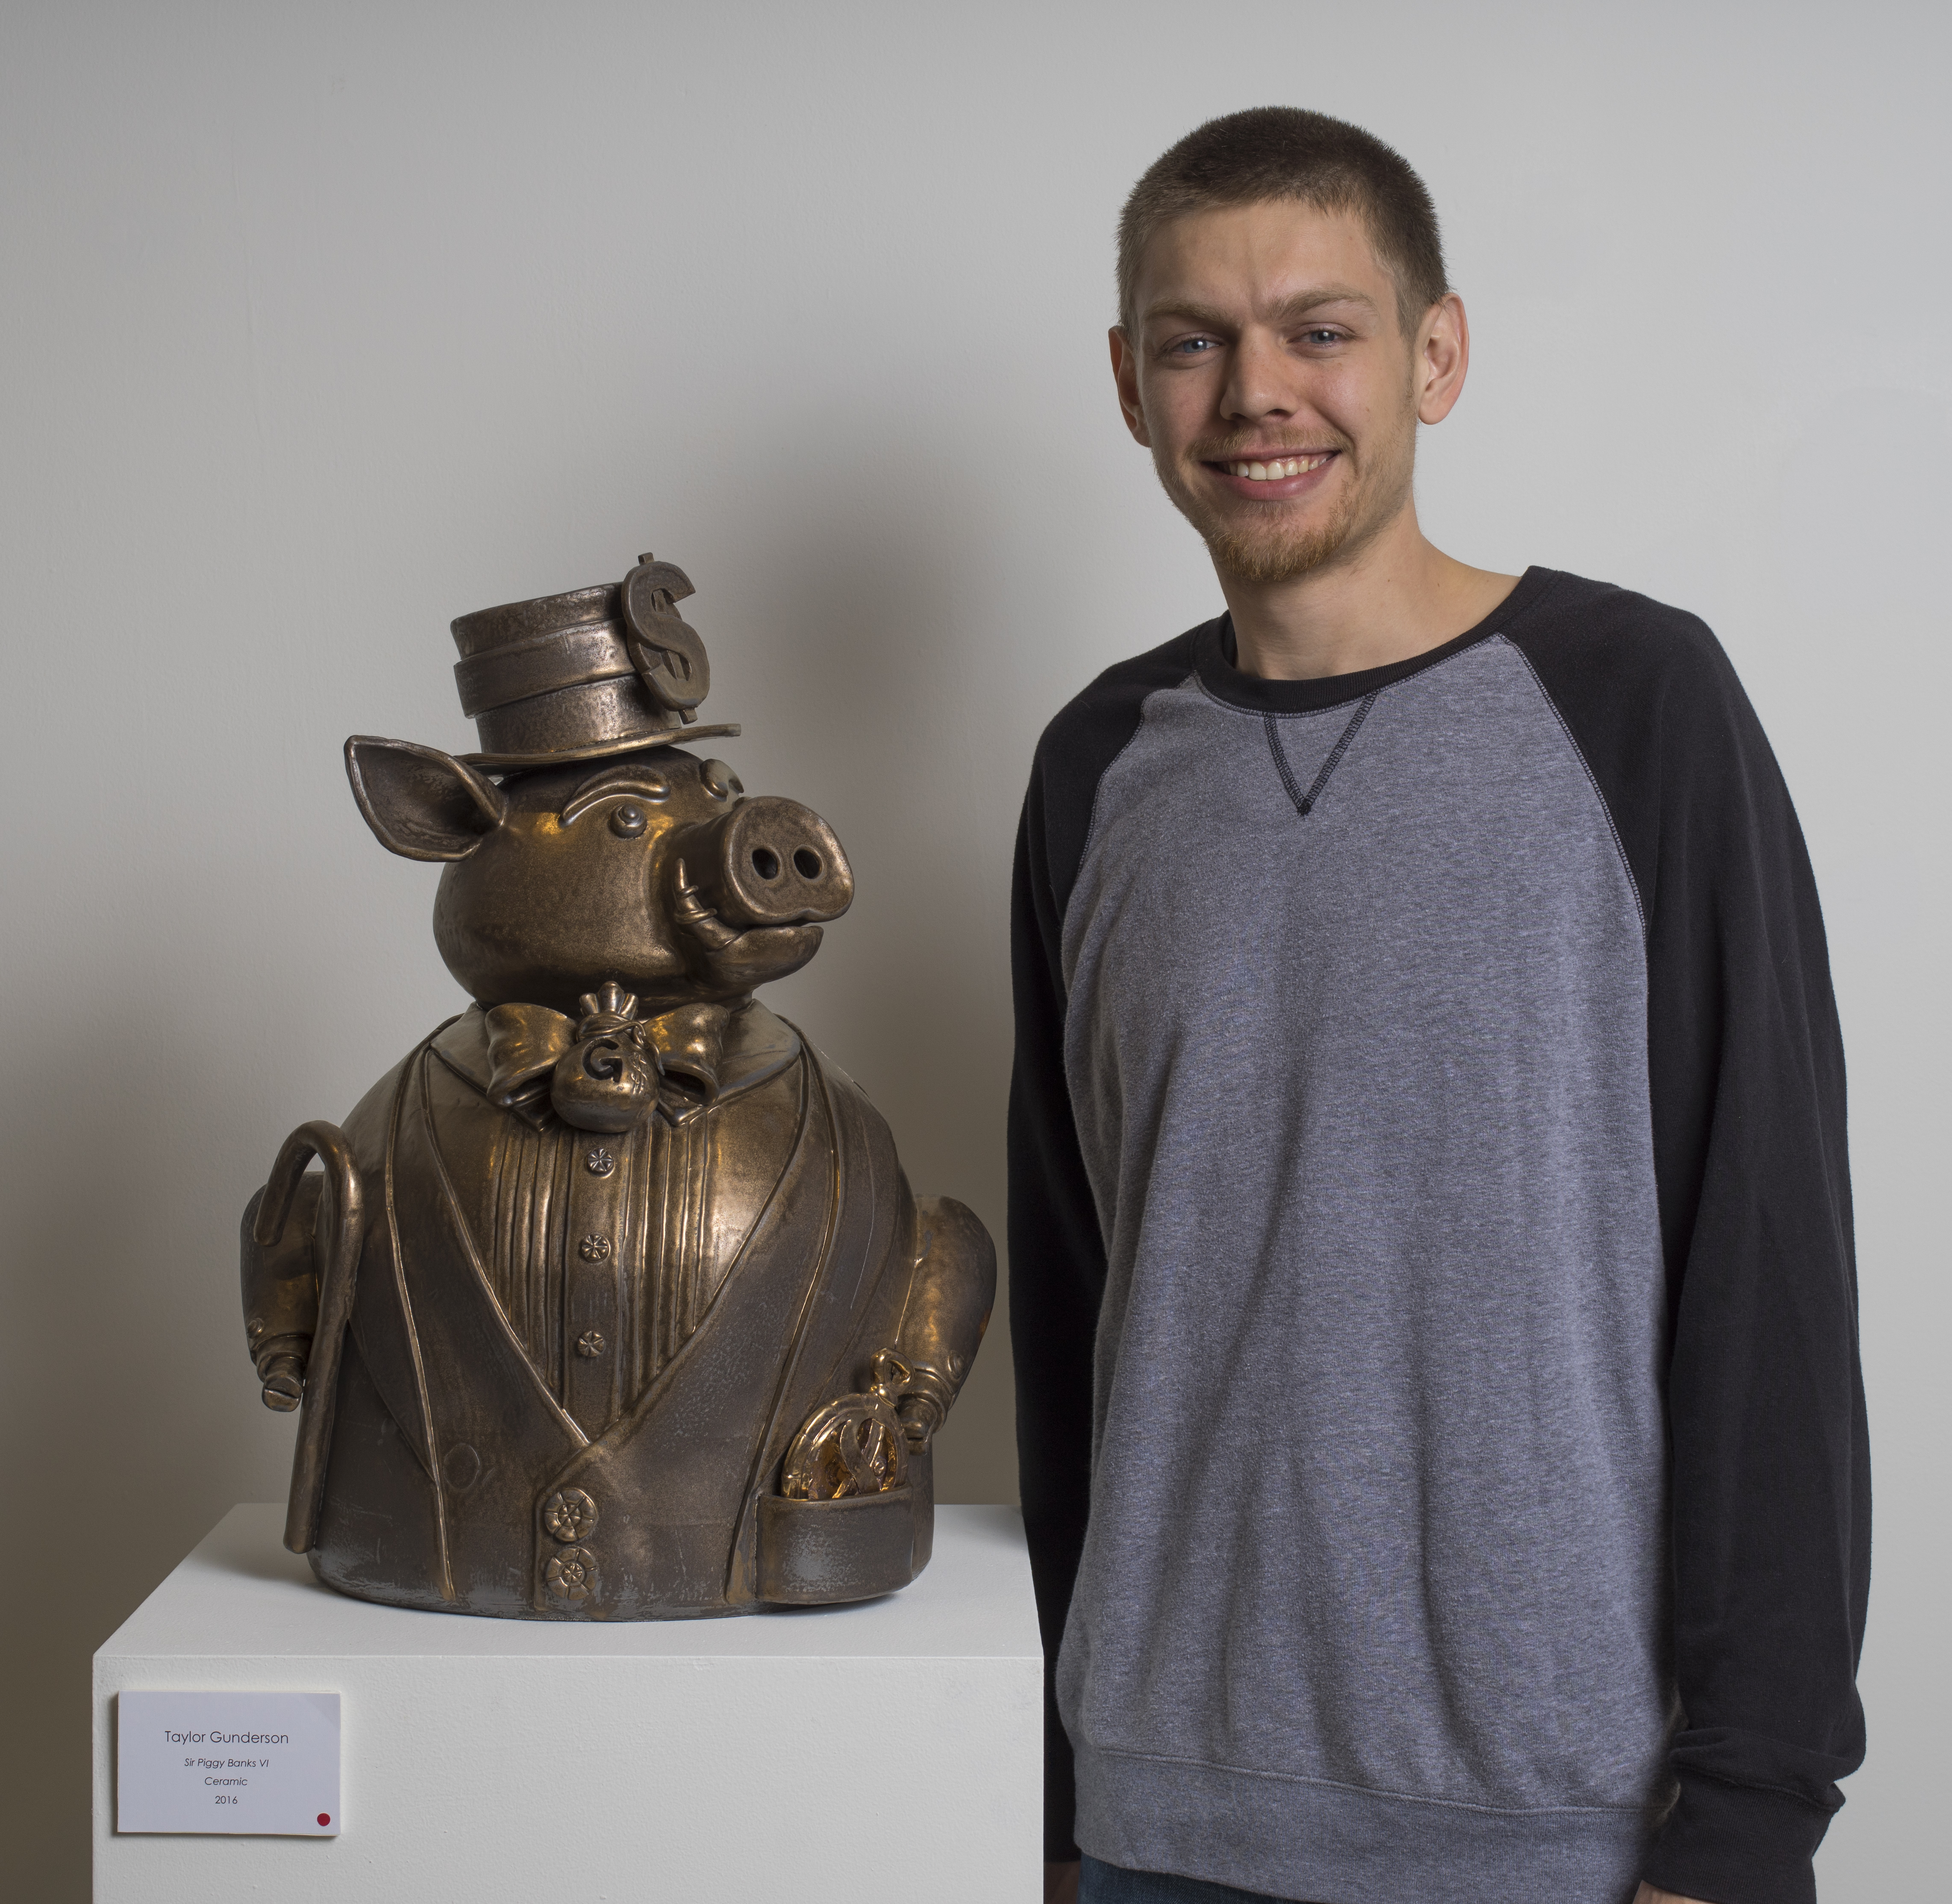 Taylor Gunderson pictured beside his piece, Sir Piggy Banks VI